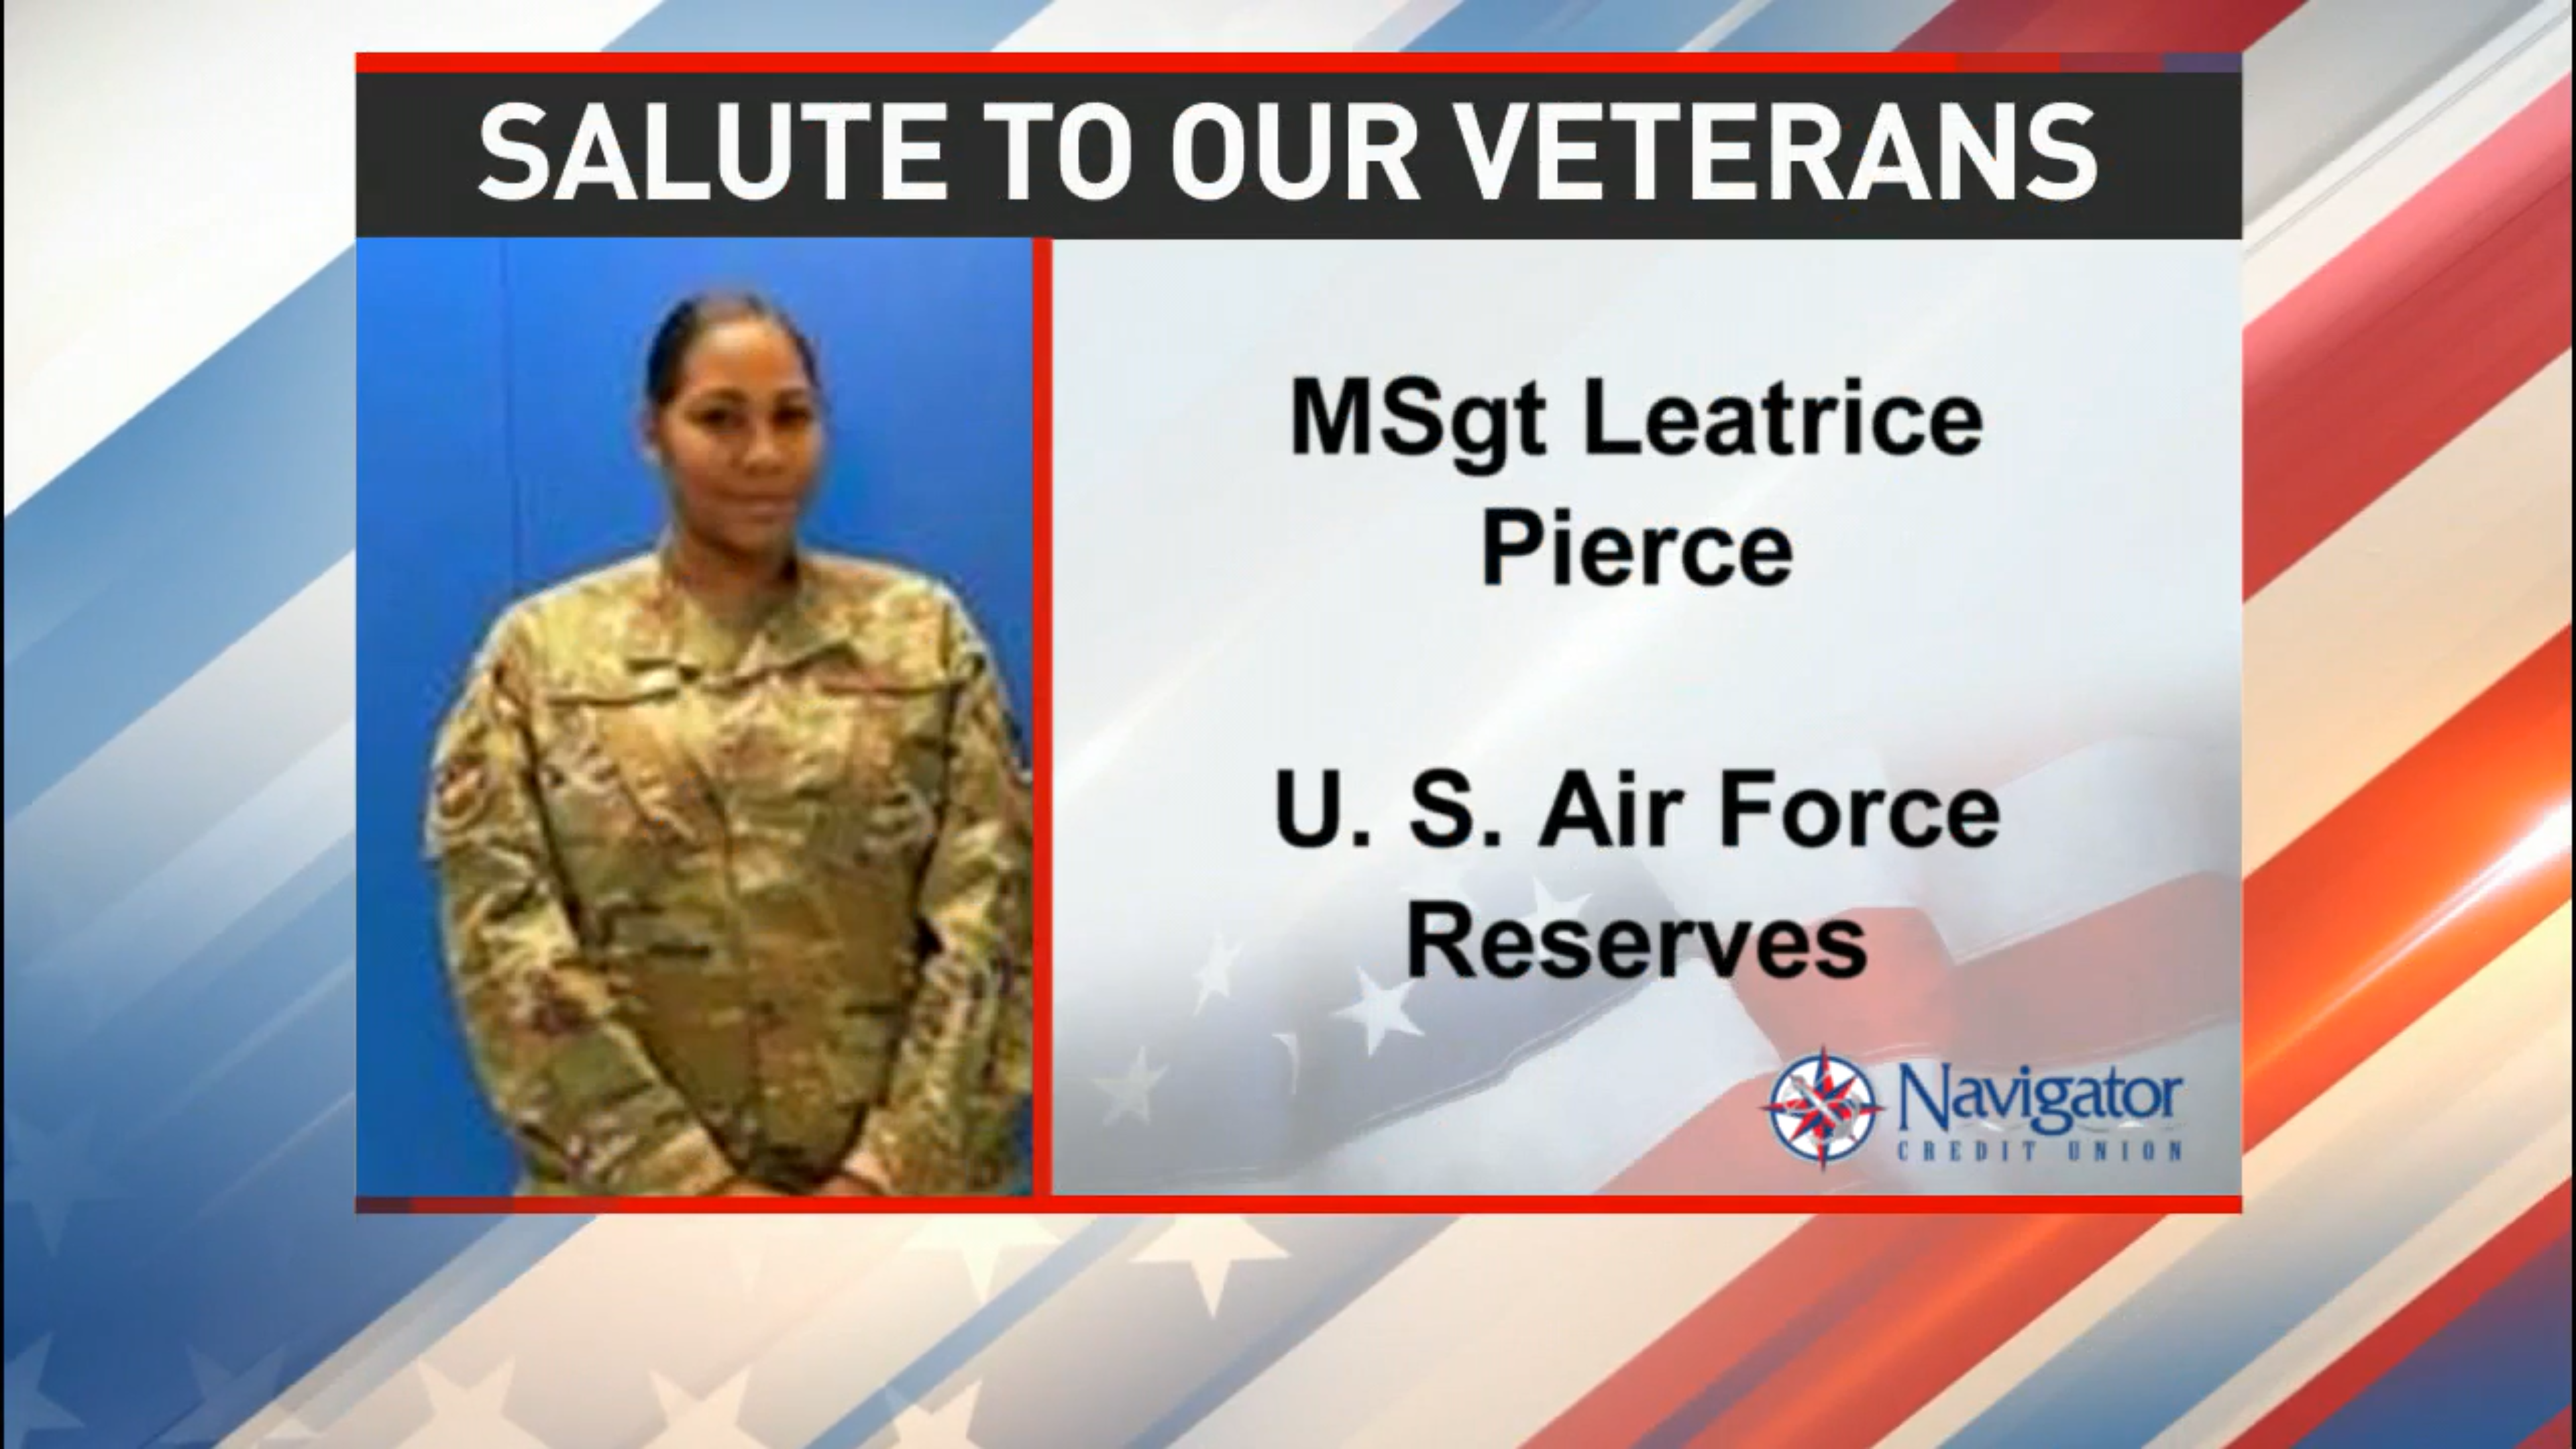 Alabama news station pays tribute to local veterans